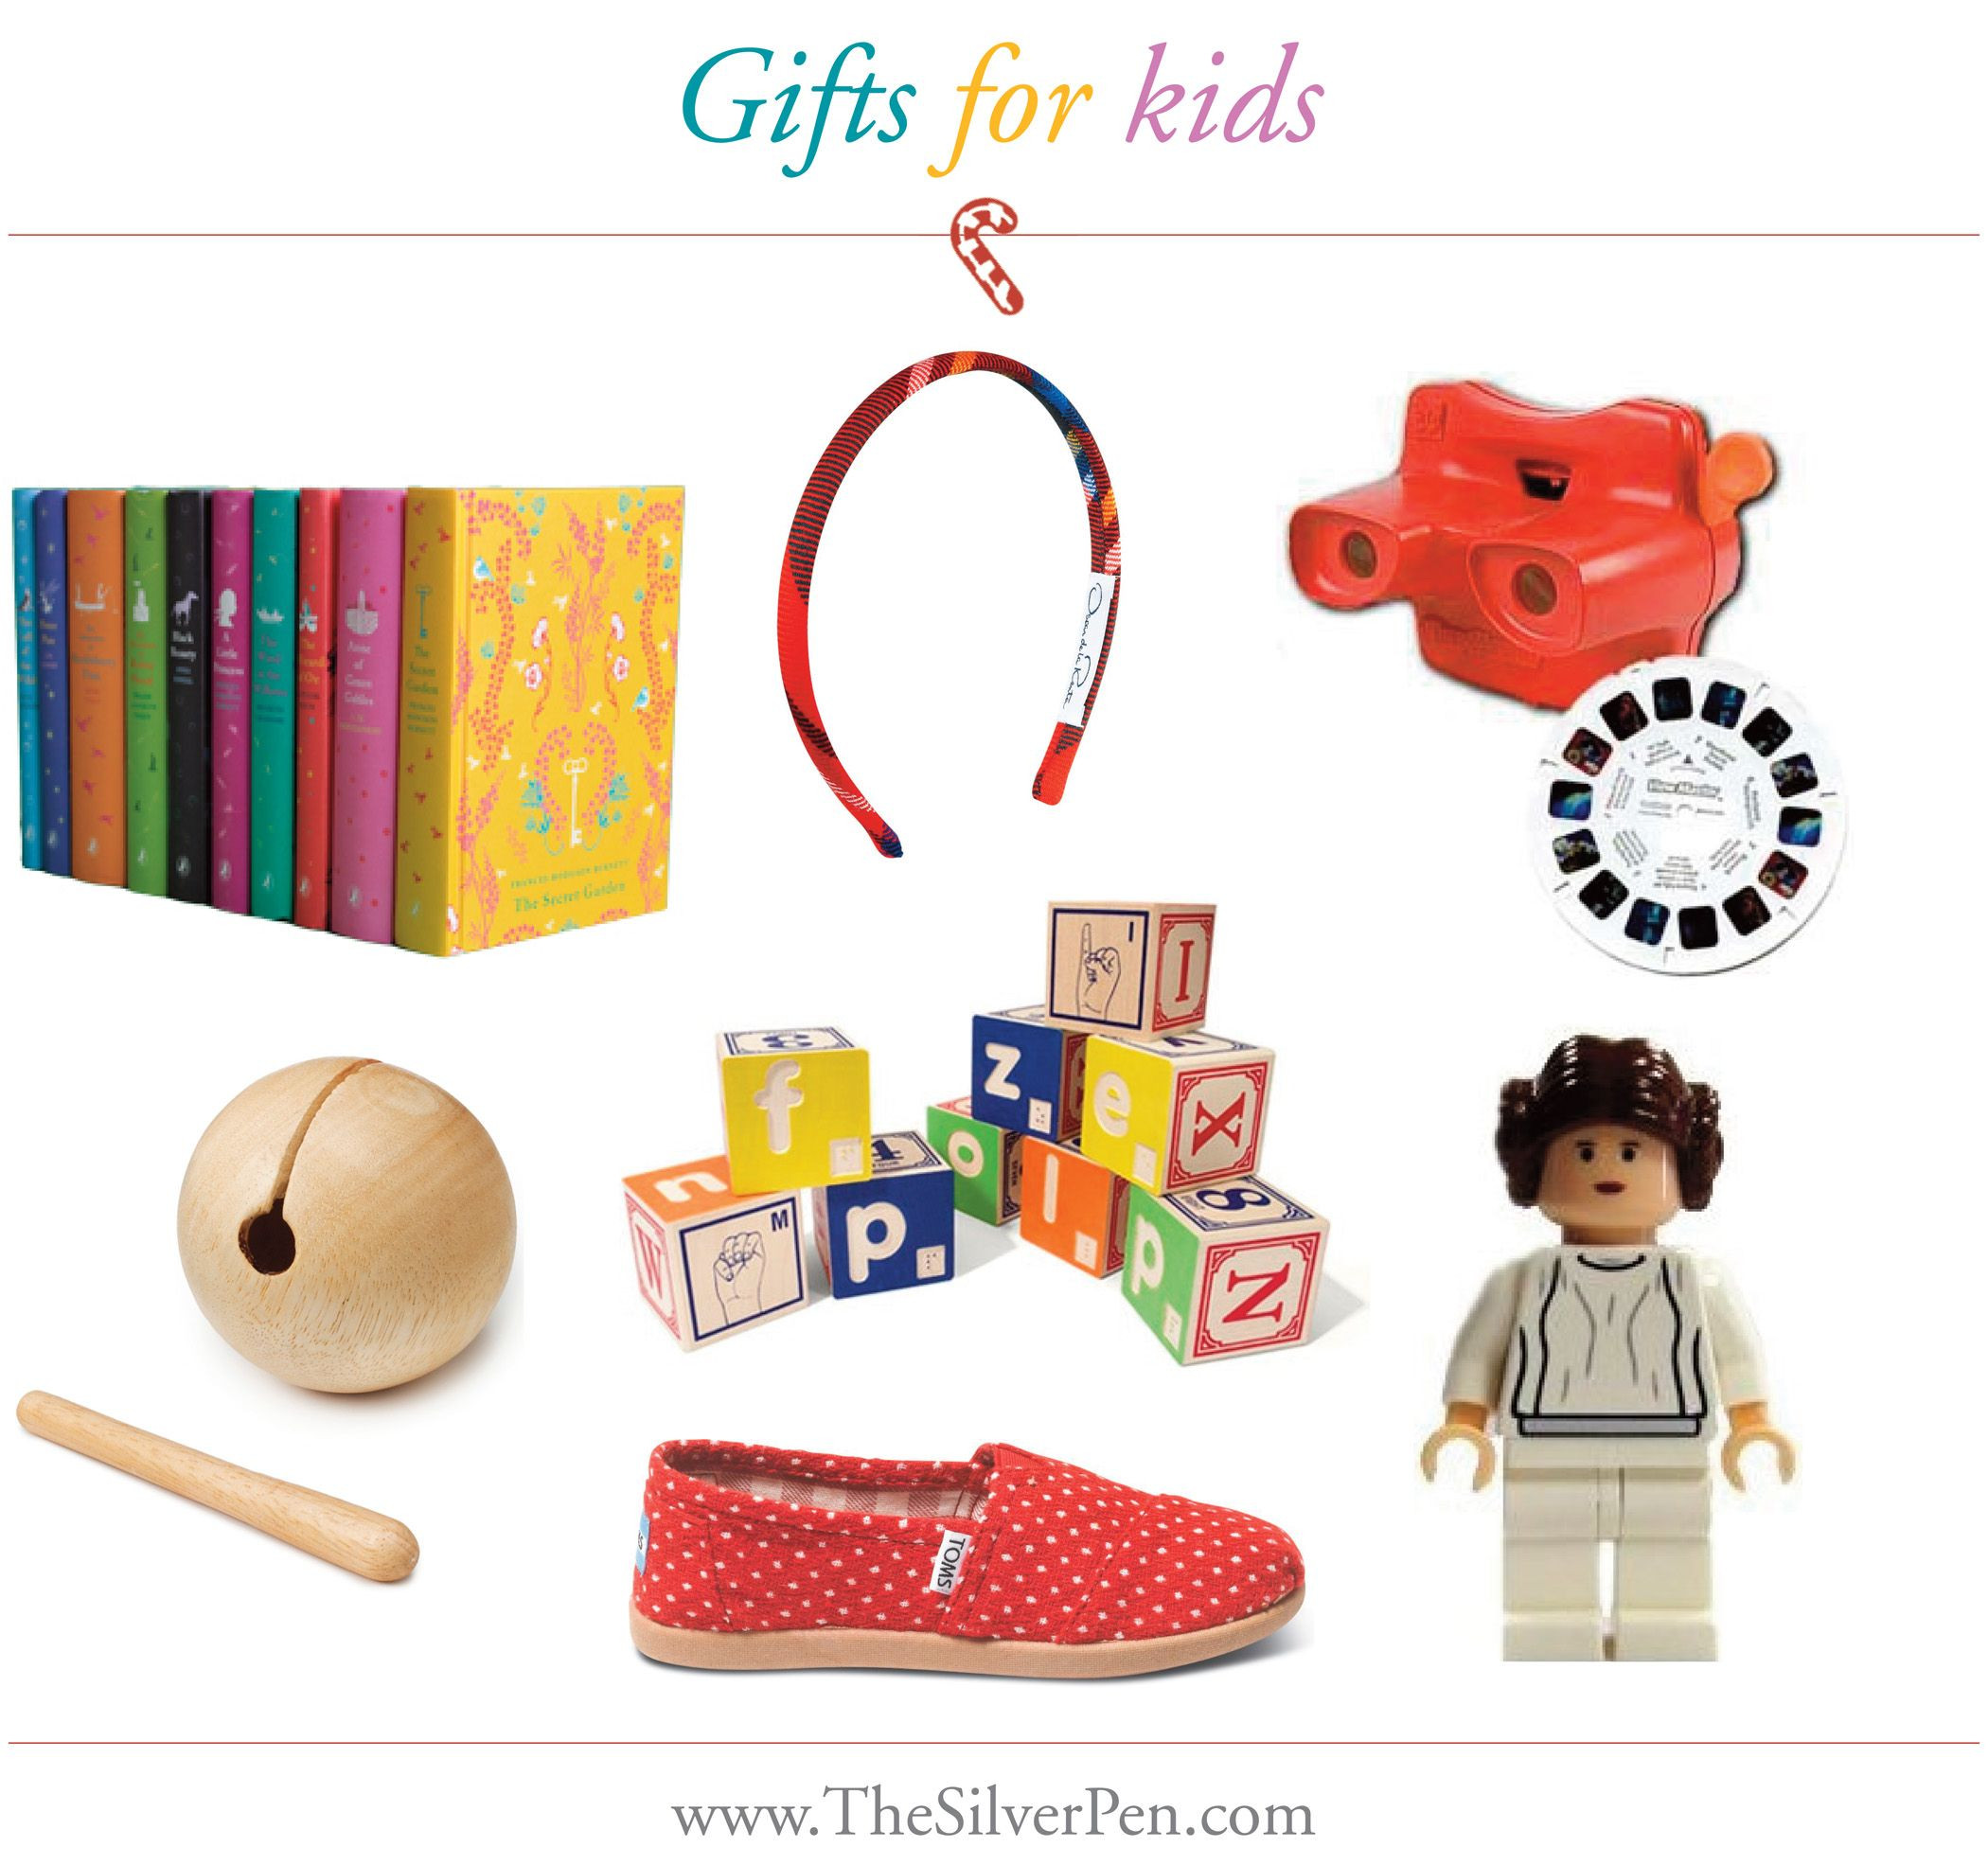 Gift Ideas For Kids With Cancer
 Gift ideas for kids